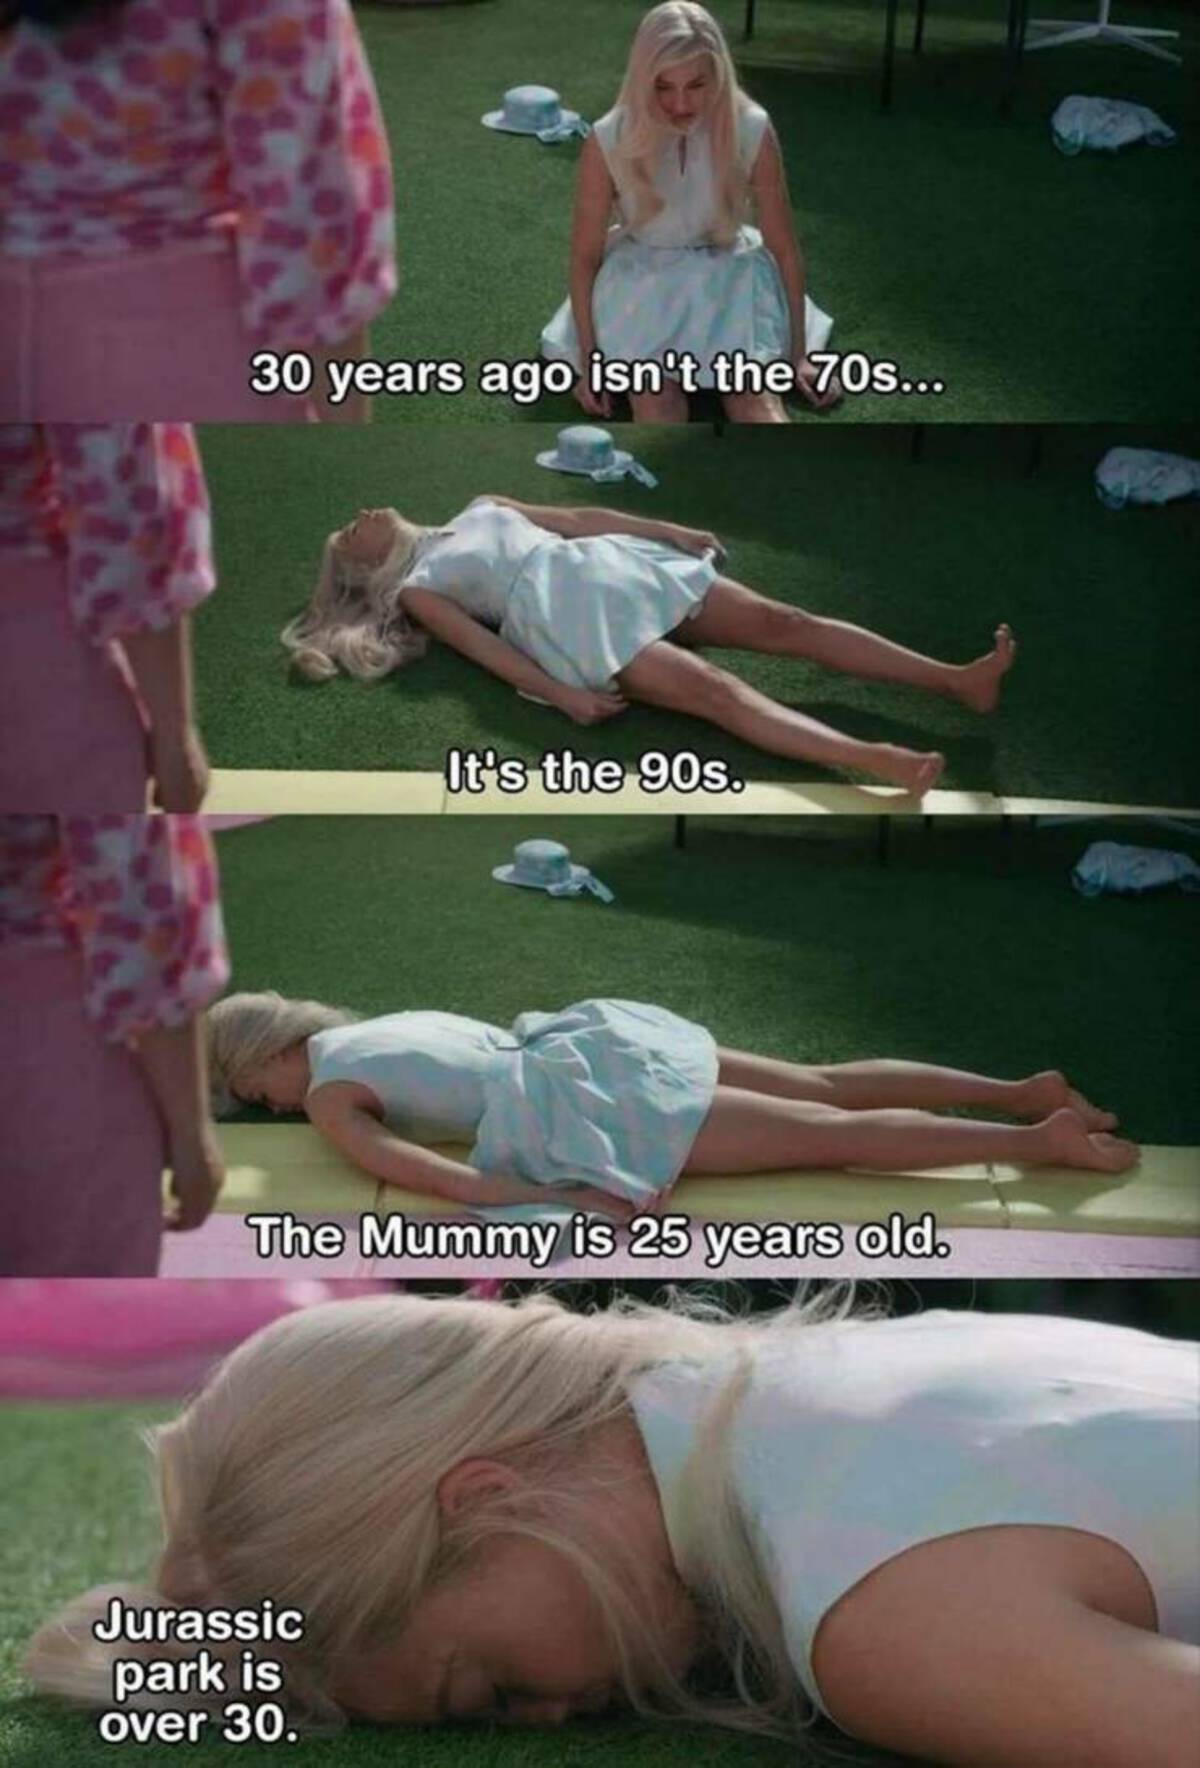 girl - 30 years ago isn't the 70s... It's the 90s. The Mummy is 25 years old. Jurassic park is over 30.